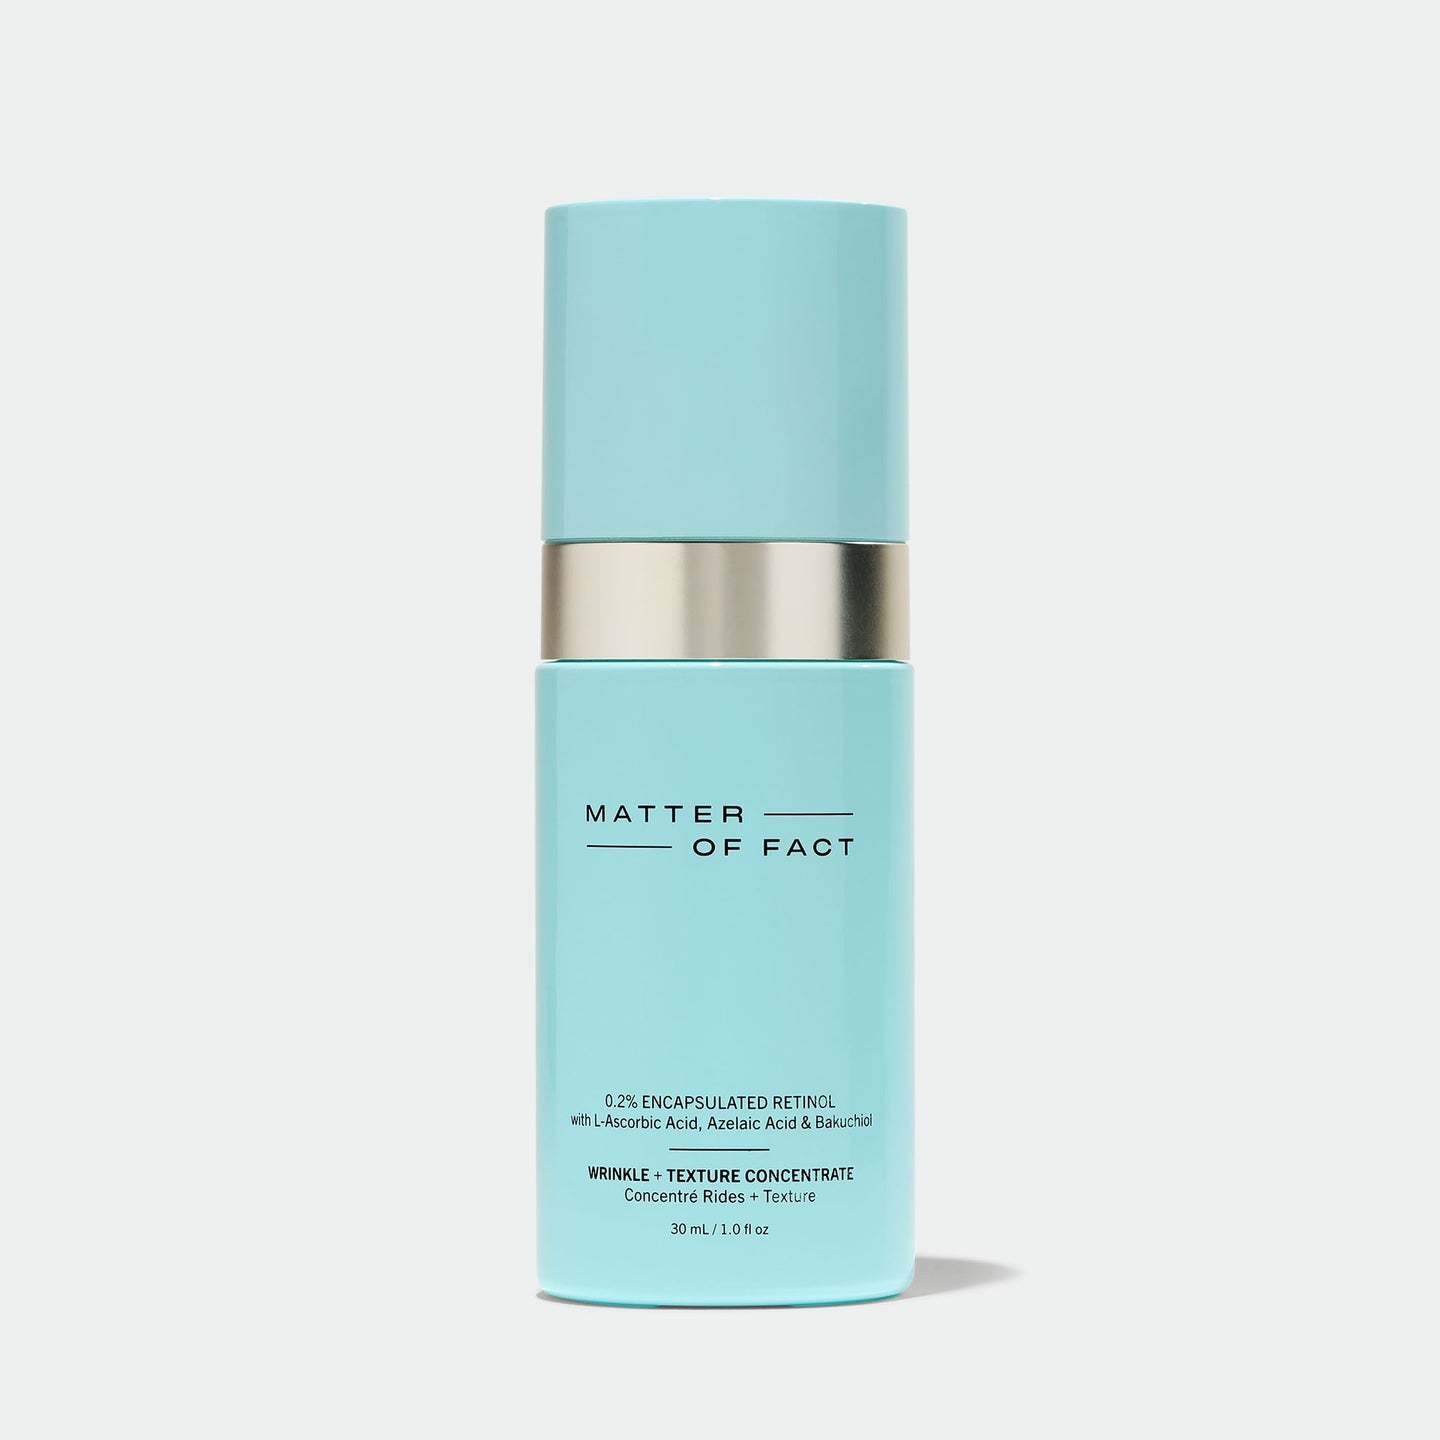 MATTER OF FACT SKINCARE WRINKLE AND TEXTURE CONCENTRATE